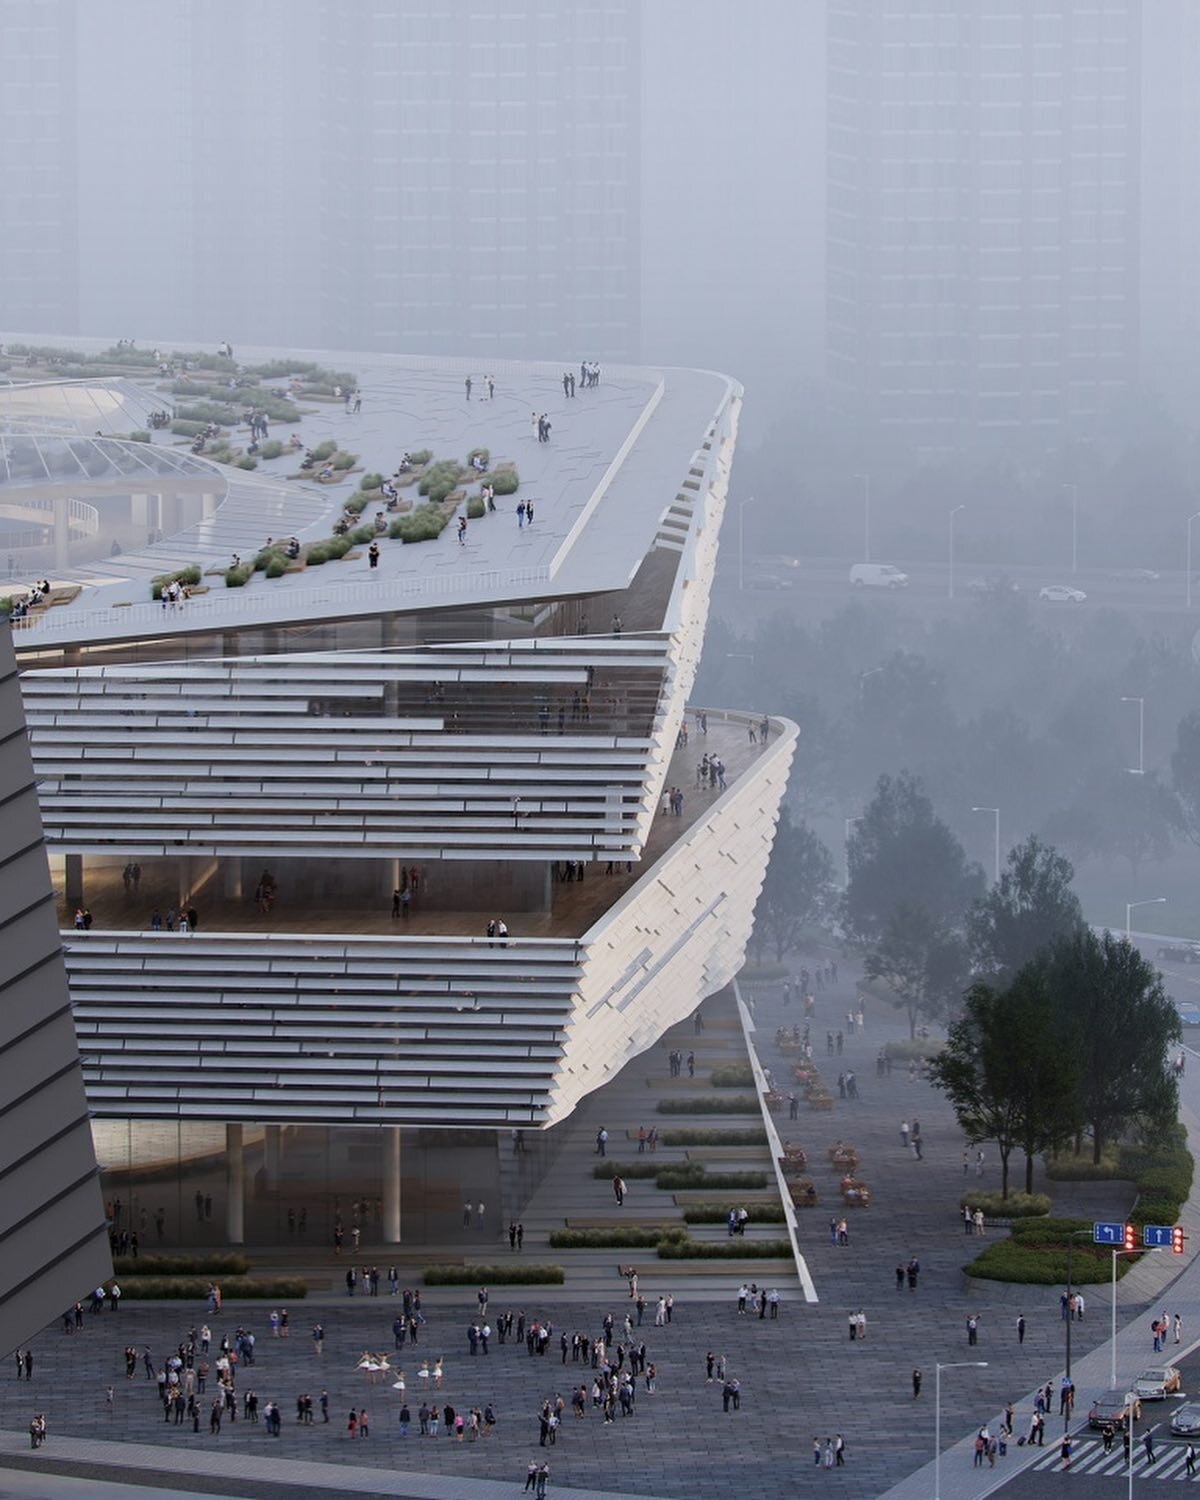 CHAP is recently being featured in @goooodofficial for our shortlisted competition proposal &lsquo;The Cloud of Wuhan&rsquo; collaborating with THUPDI. 

The library of the future is equipped to empower people with knowledge &mdash; it recognizes the